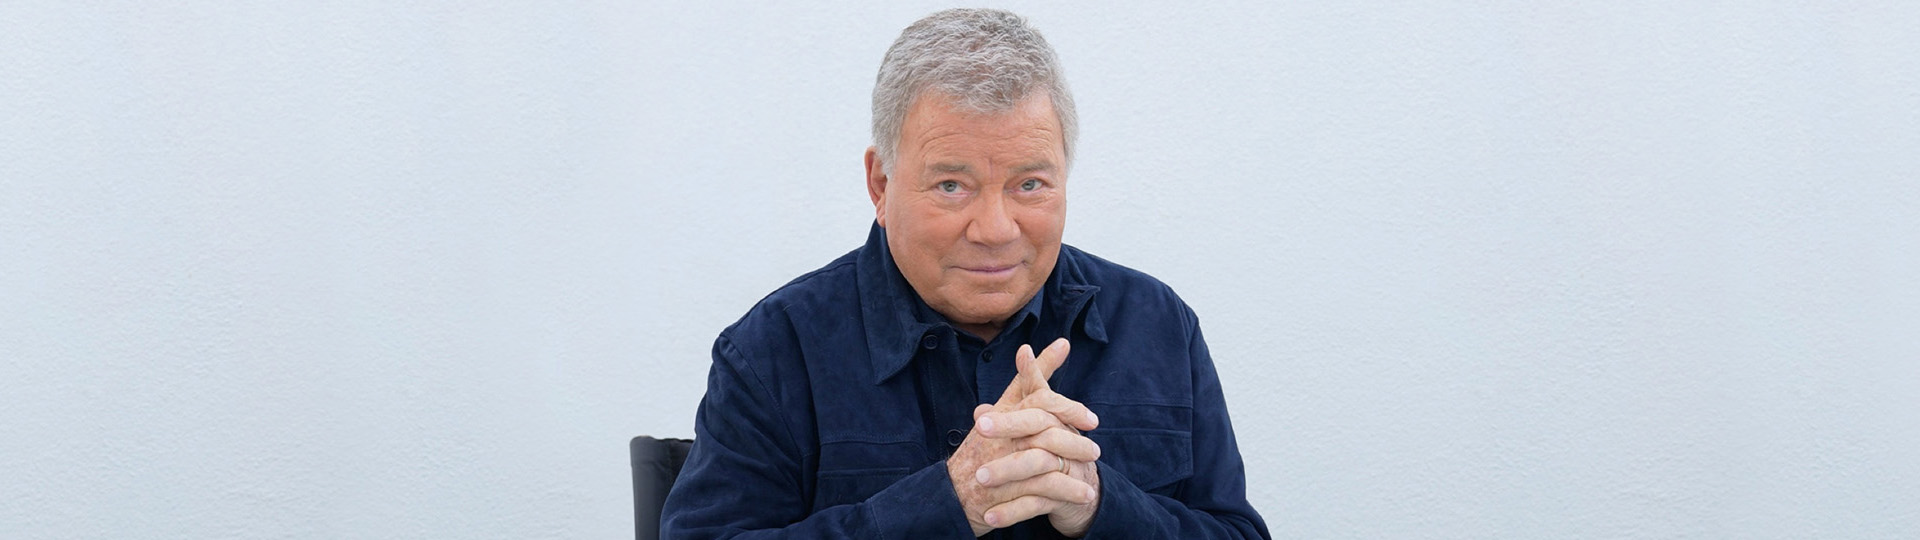 HearingLife and William Shatner team up